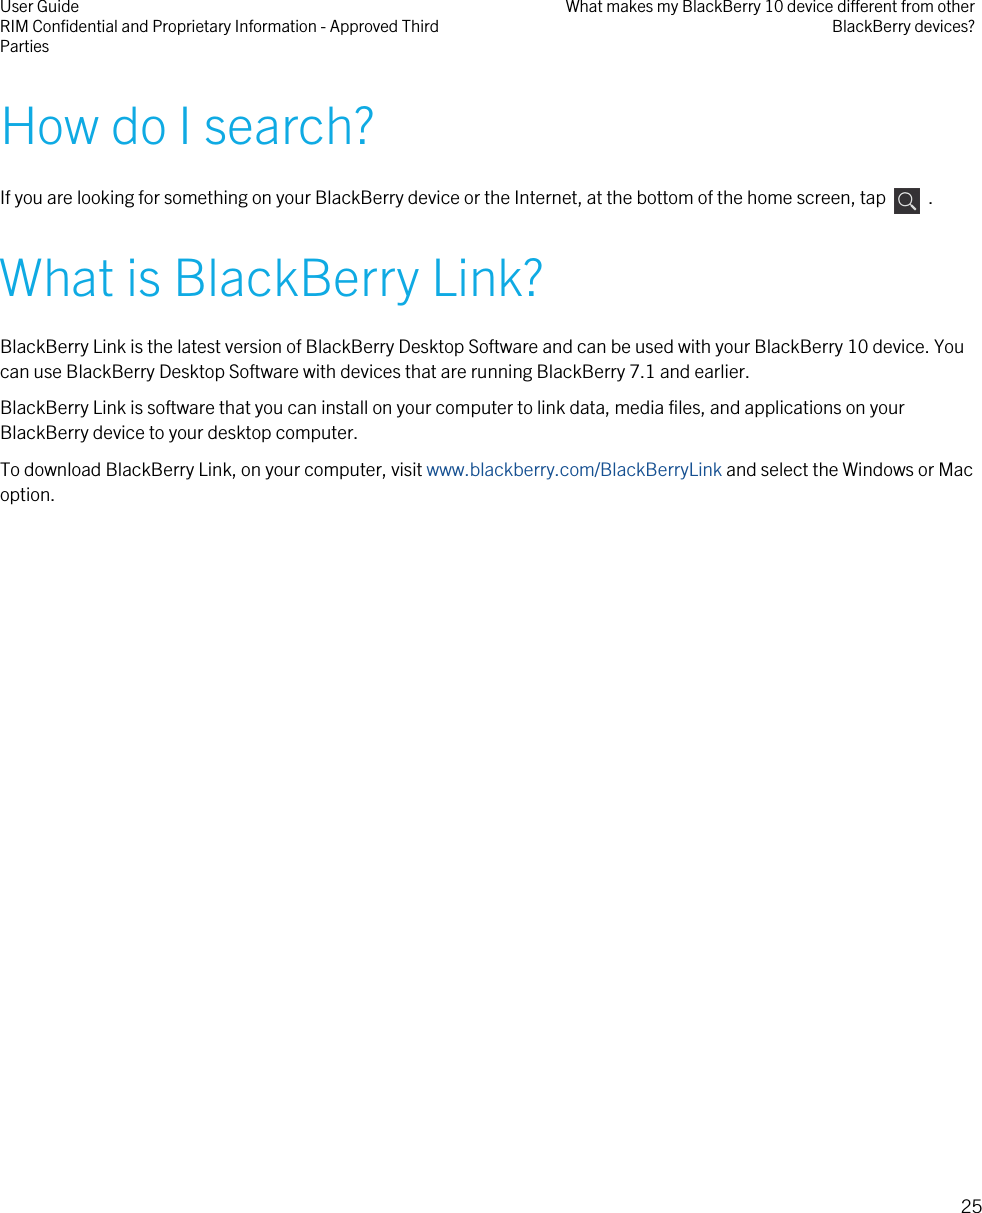 How do I search?If you are looking for something on your BlackBerry device or the Internet, at the bottom of the home screen, tap    .What is BlackBerry Link?BlackBerry Link is the latest version of BlackBerry Desktop Software and can be used with your BlackBerry 10 device. Youcan use BlackBerry Desktop Software with devices that are running BlackBerry 7.1 and earlier.BlackBerry Link is software that you can install on your computer to link data, media files, and applications on yourBlackBerry device to your desktop computer.To download BlackBerry Link, on your computer, visit www.blackberry.com/BlackBerryLink and select the Windows or Macoption.User GuideRIM Confidential and Proprietary Information - Approved ThirdPartiesWhat makes my BlackBerry 10 device different from otherBlackBerry devices?25